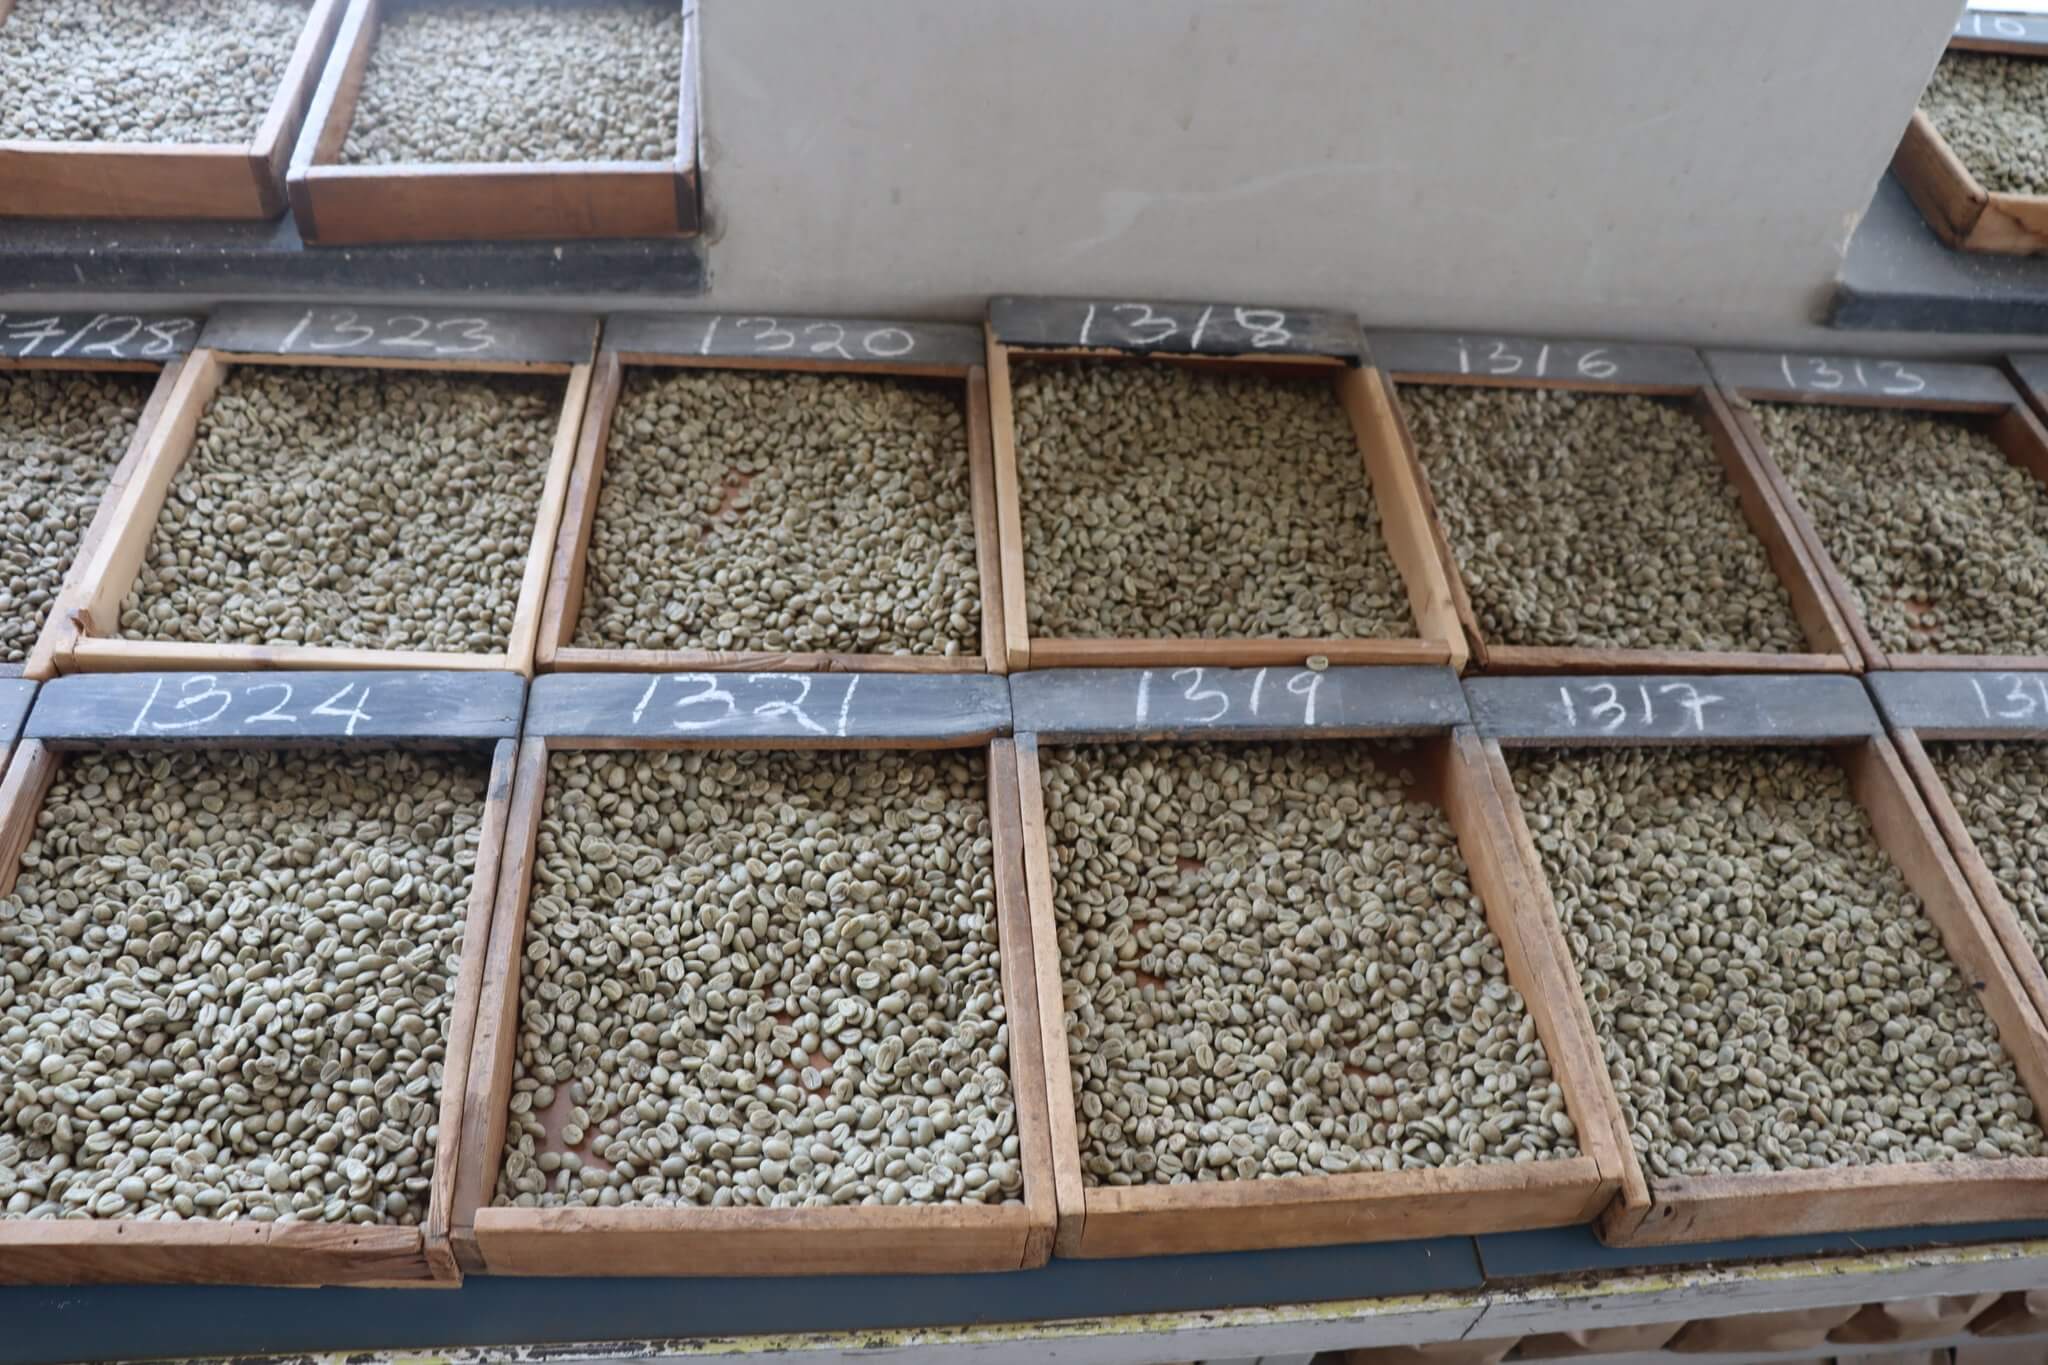 Government Sets a Minimum Price of Ksh80 for a Kilo of Coffee